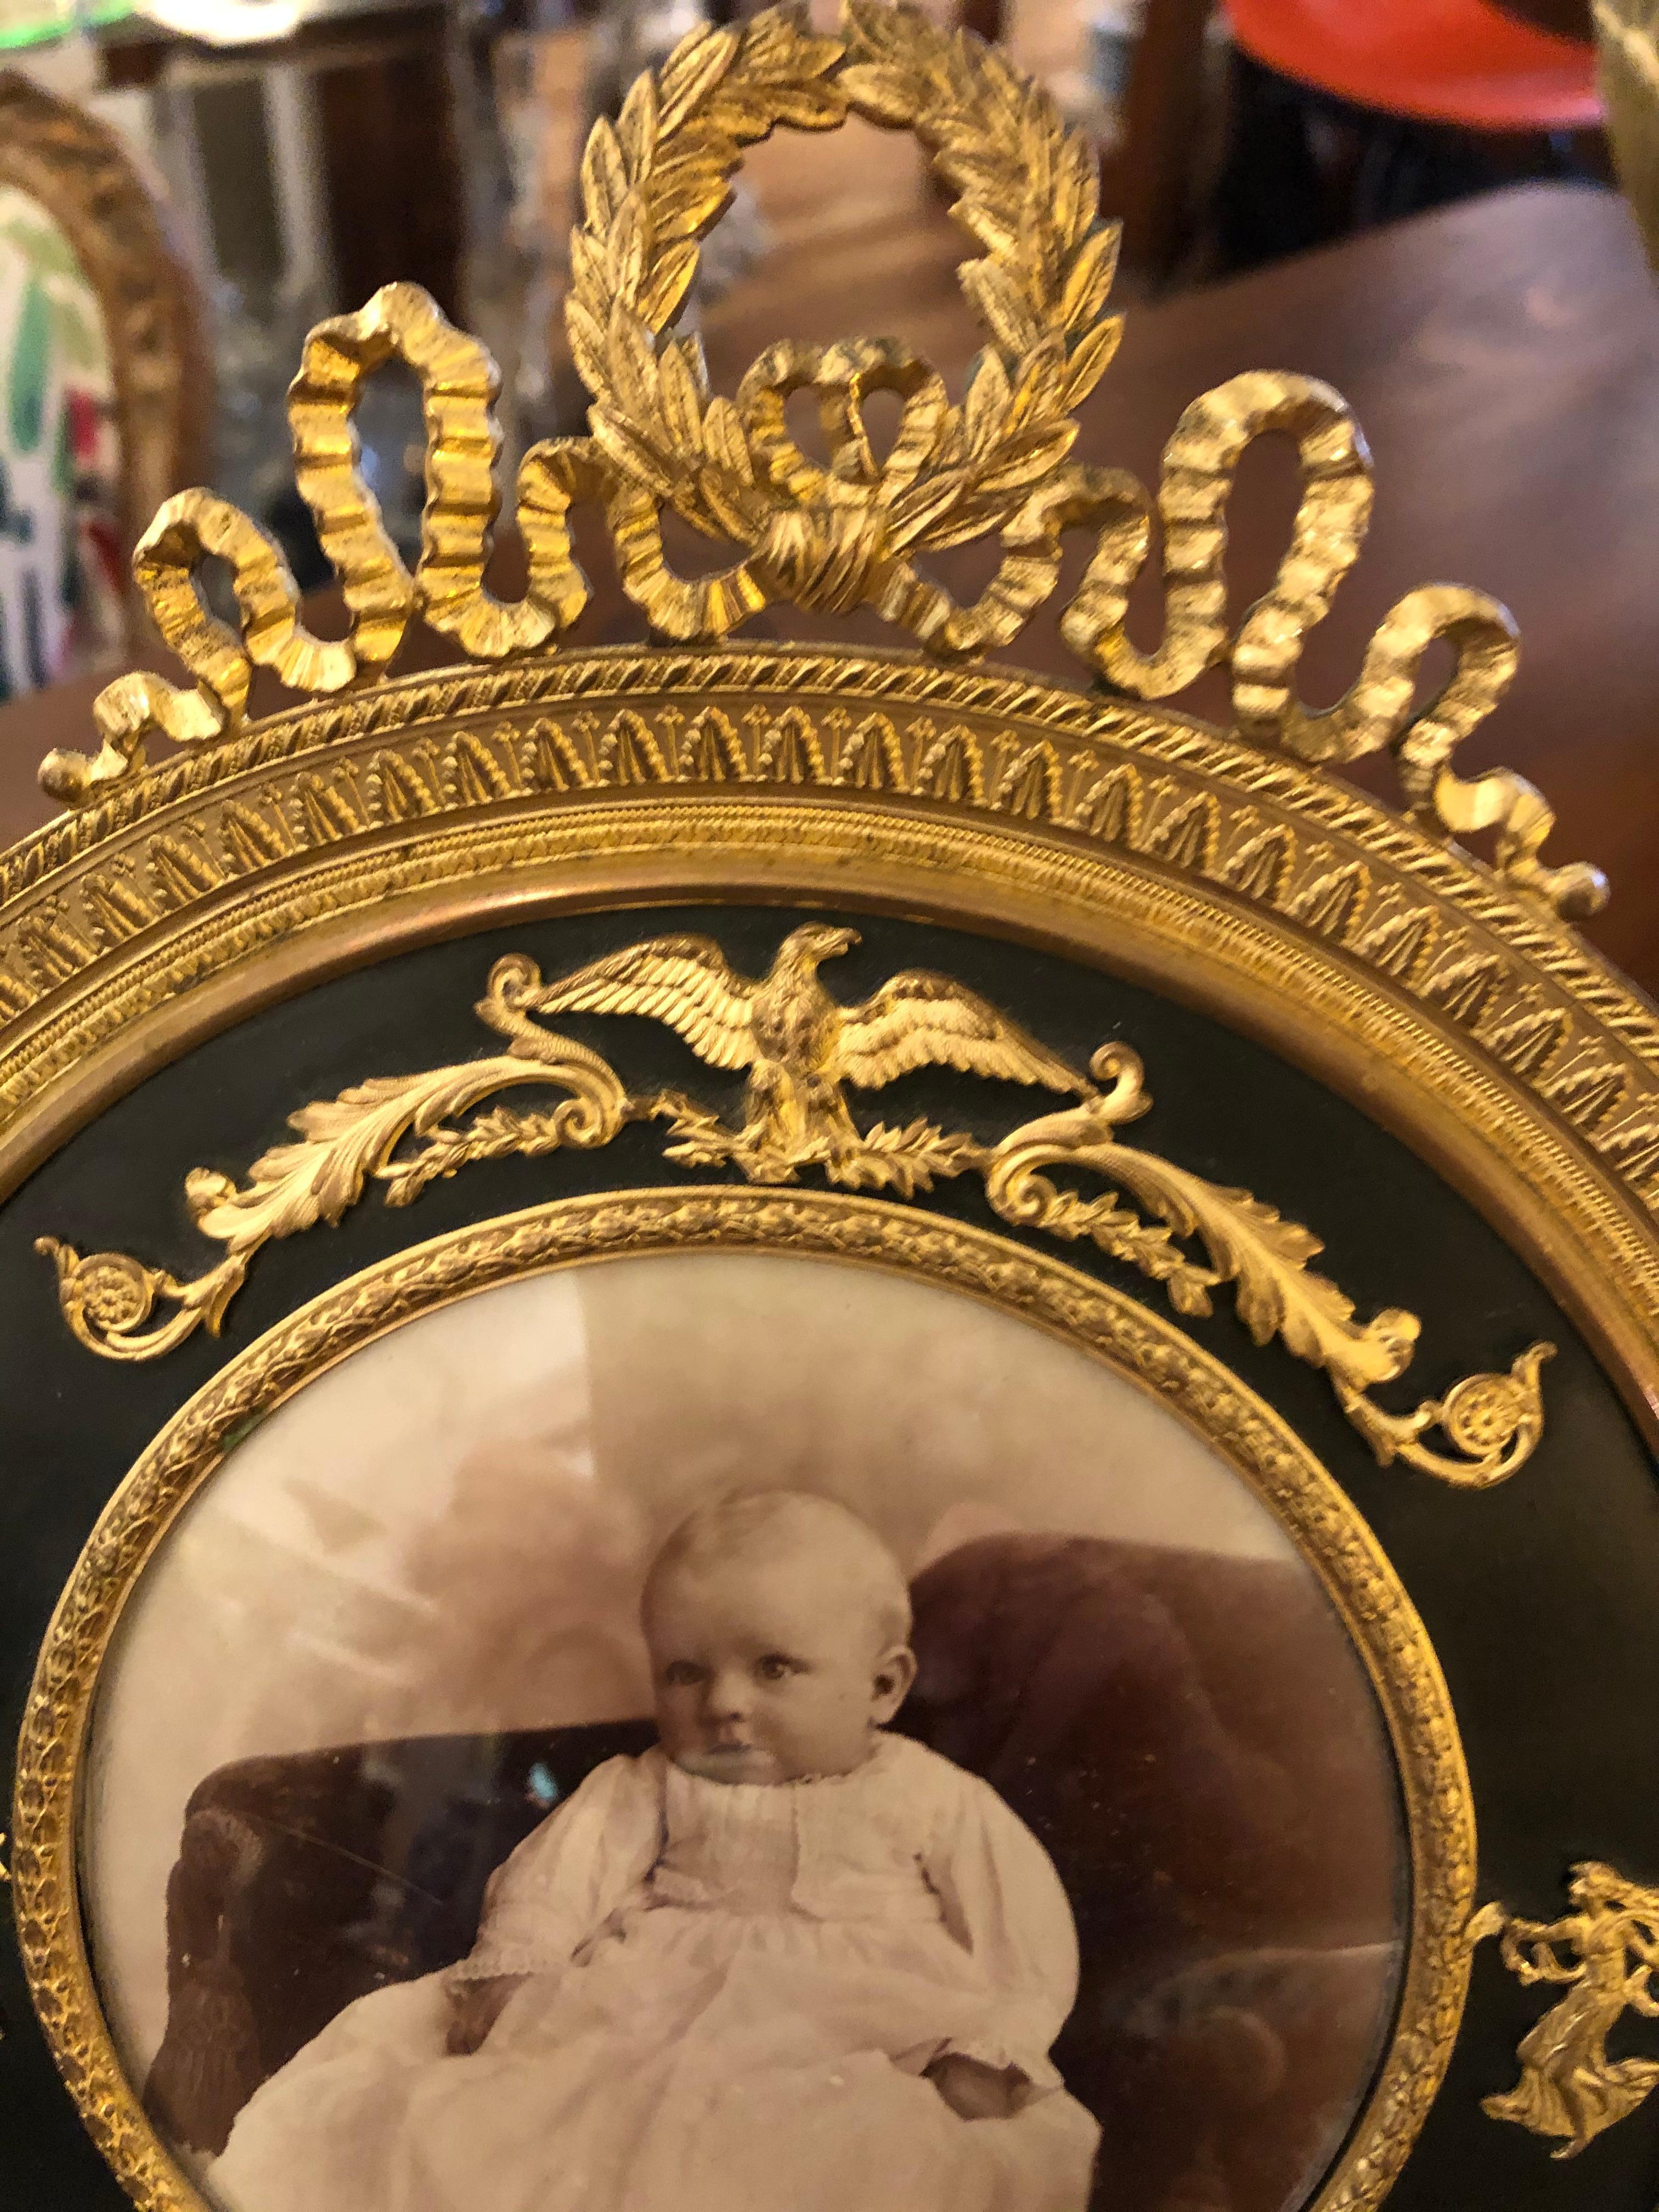 Perhaps the prettiest photo frame ever. French Empire antique gilt and patinated bronze frame having incredible details with maidens, spread eagle, and wreath on the top.